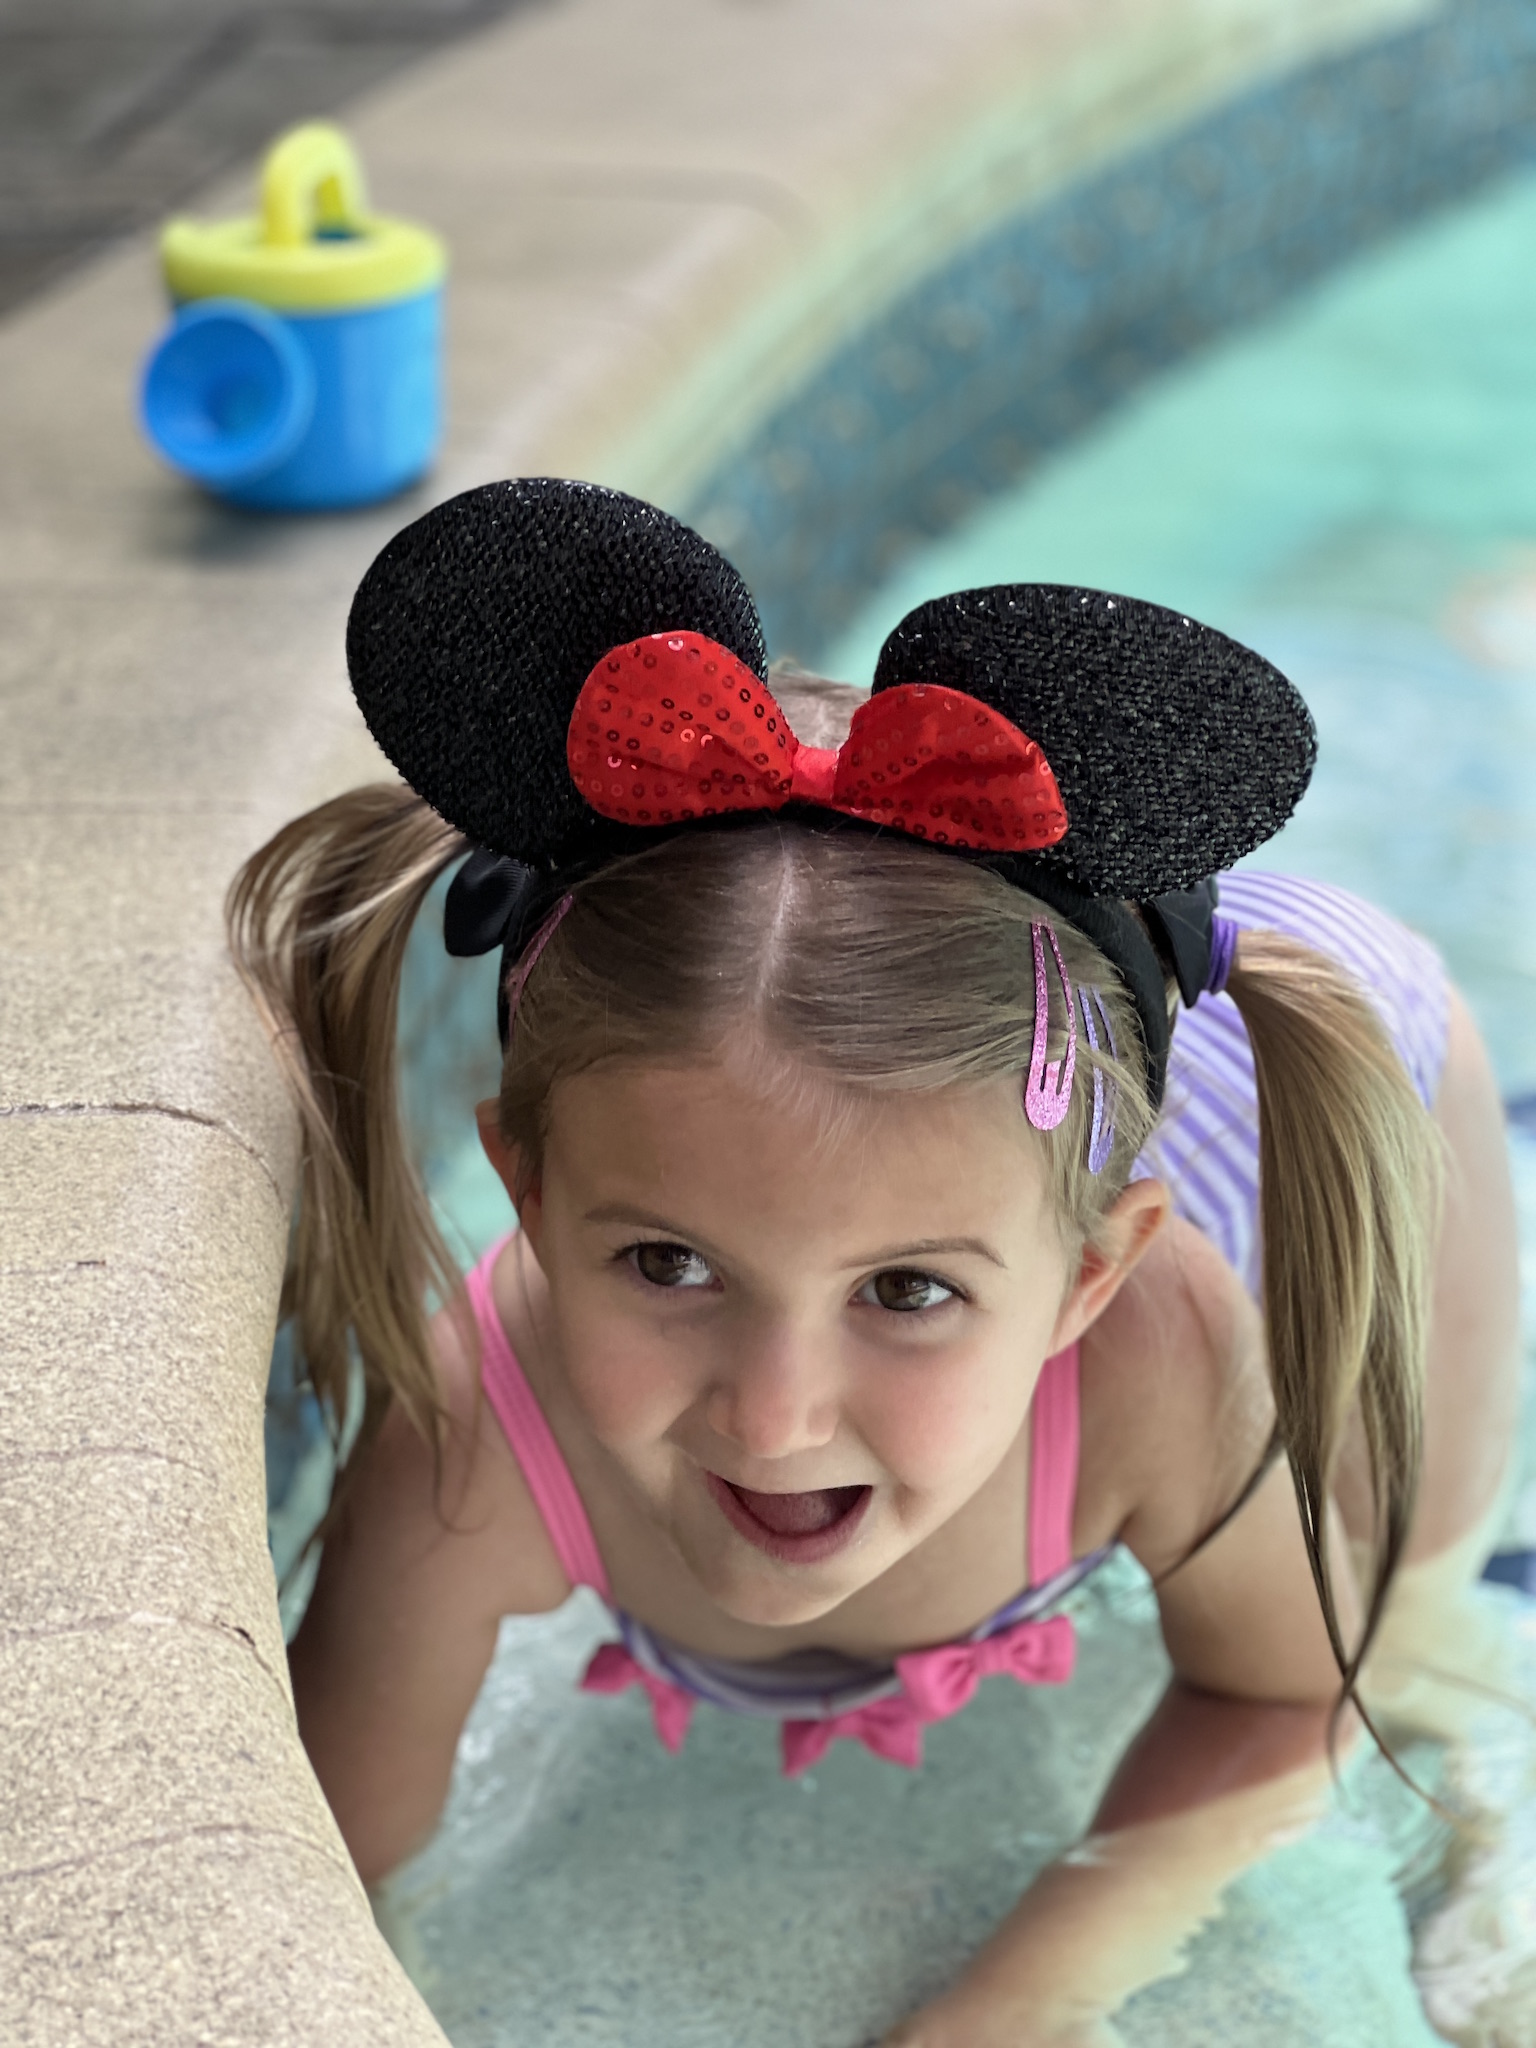 Pool time fun at Pepper's Magical "Mickey & Minnie Mouse" 3rd Birthday Pool Party | Creative ideas for hosting a magical Mickey & Minnie themed birthday bash for your little Mouseketeer with do-able decor, punny snacks, and party games that are fun for all ages! via thinkingcloset.com